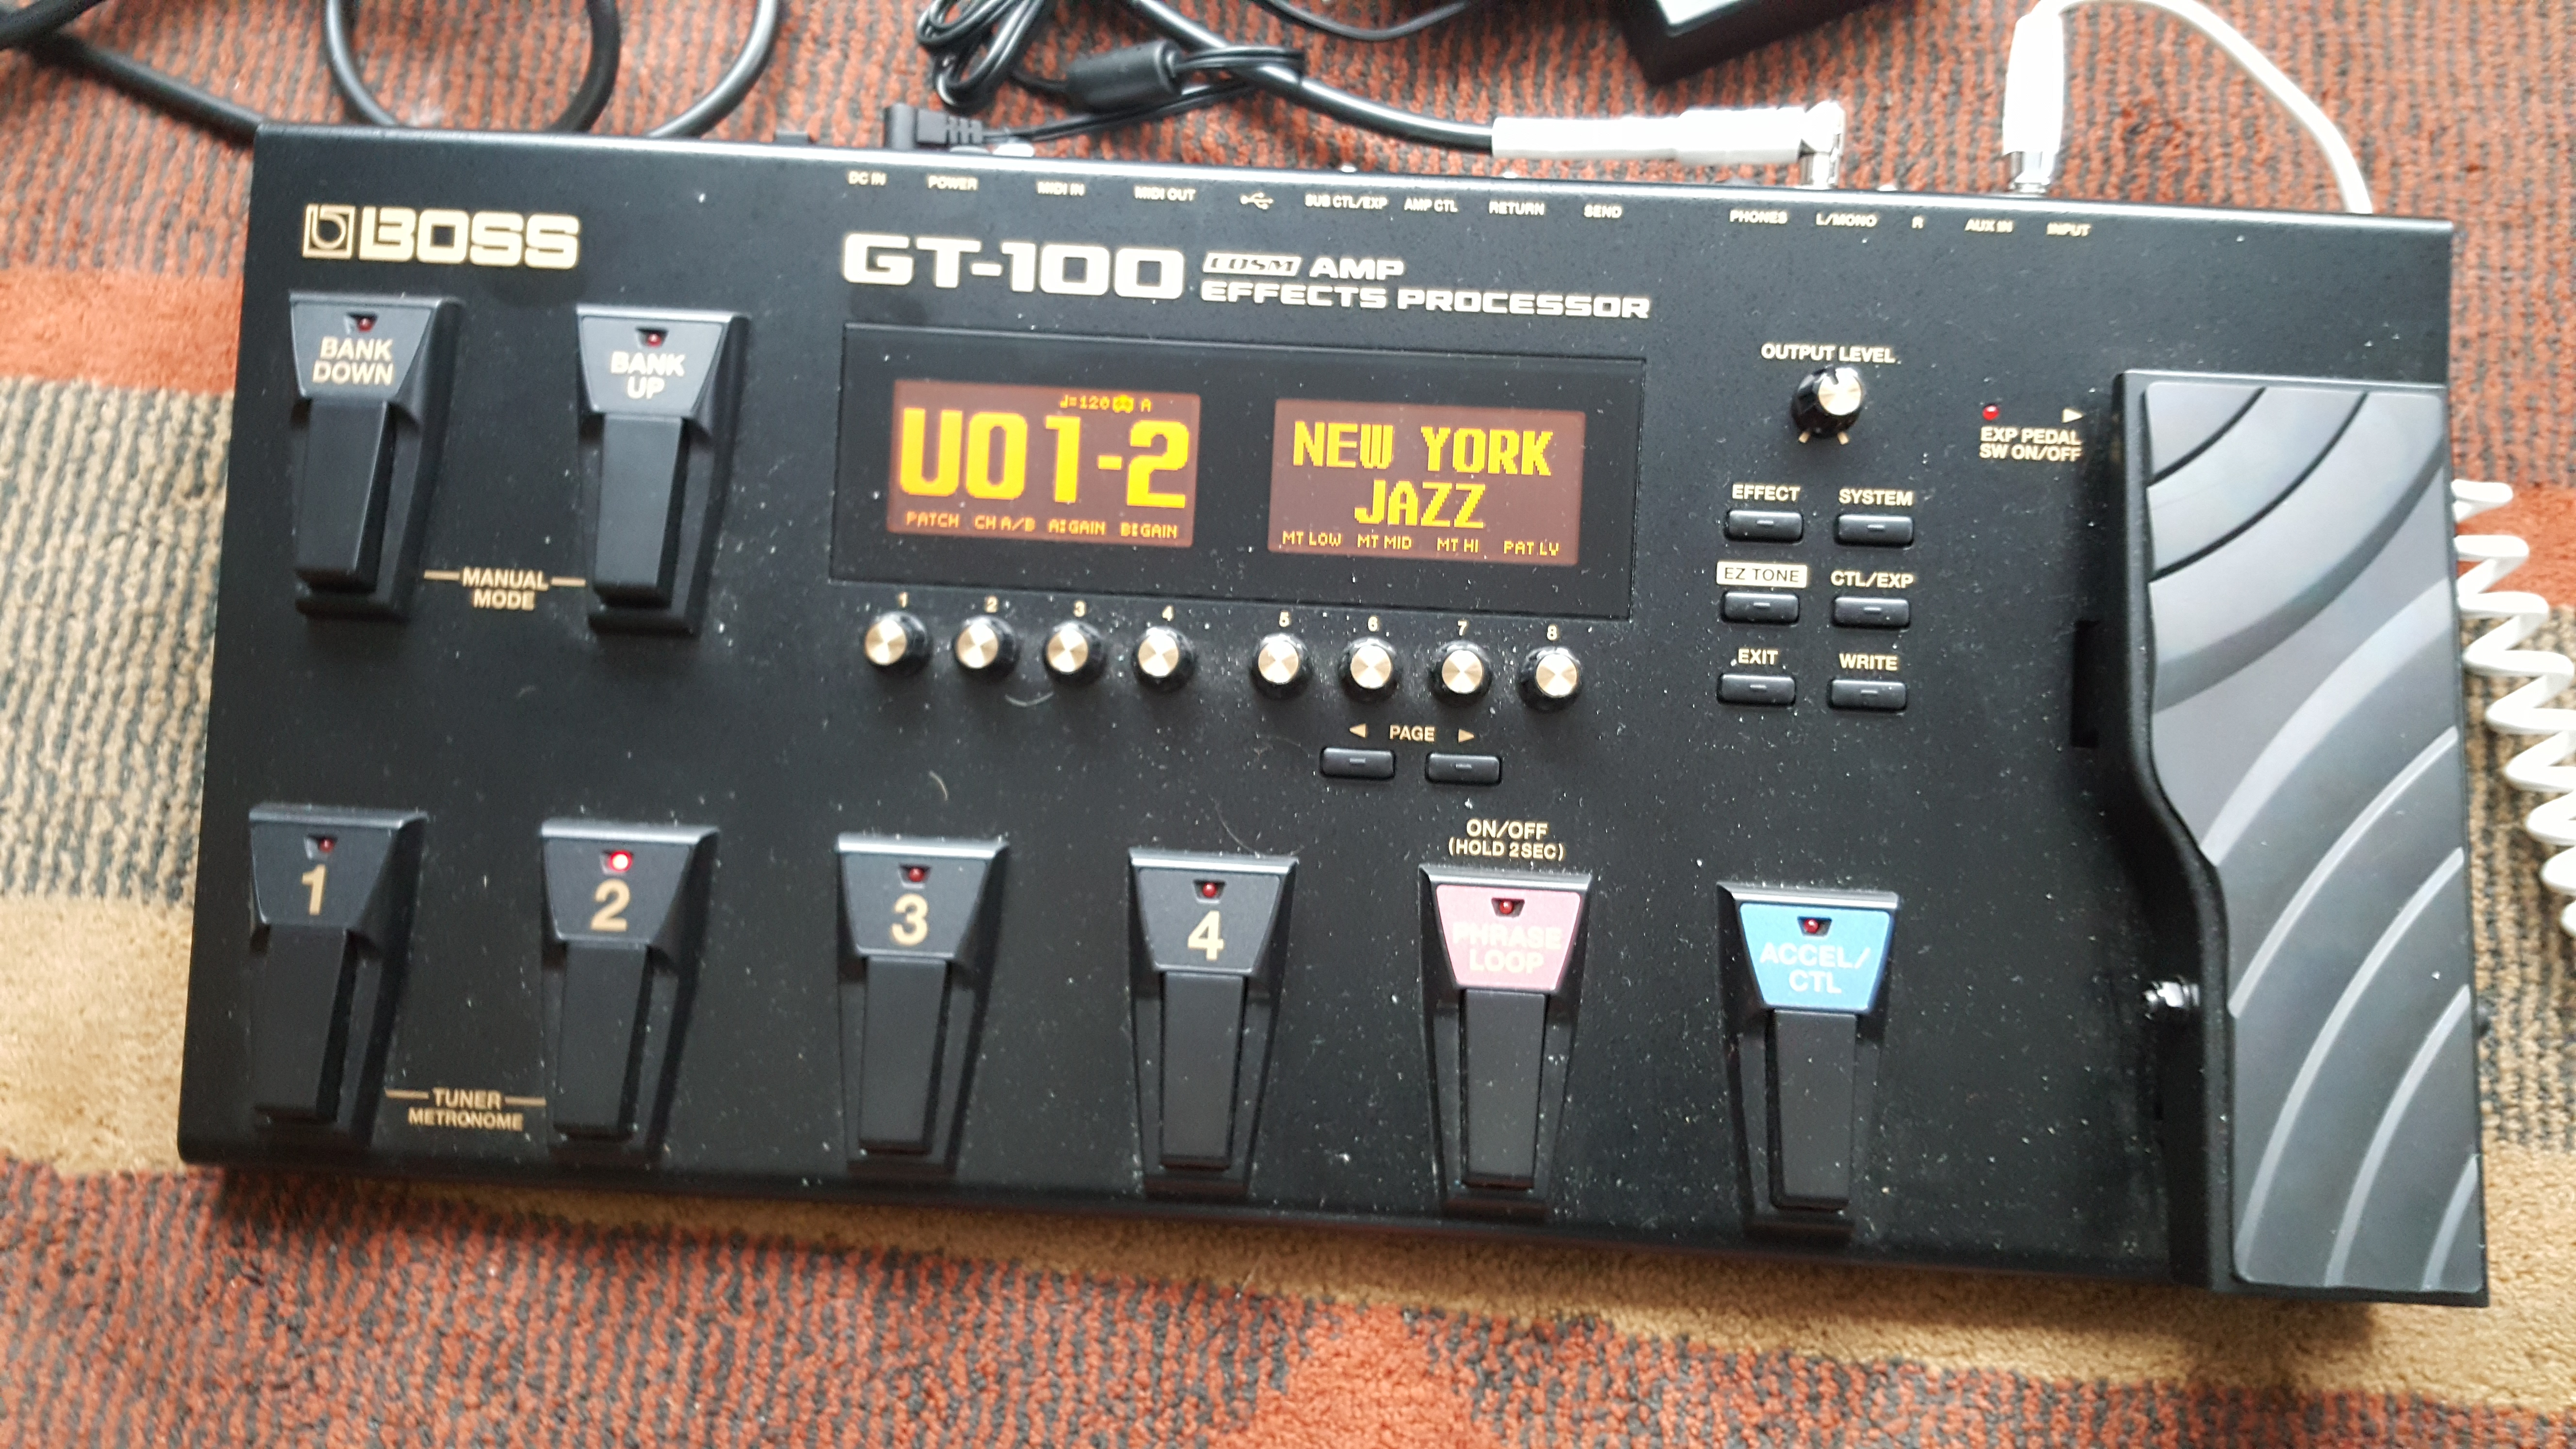 gt 100 patch exchange